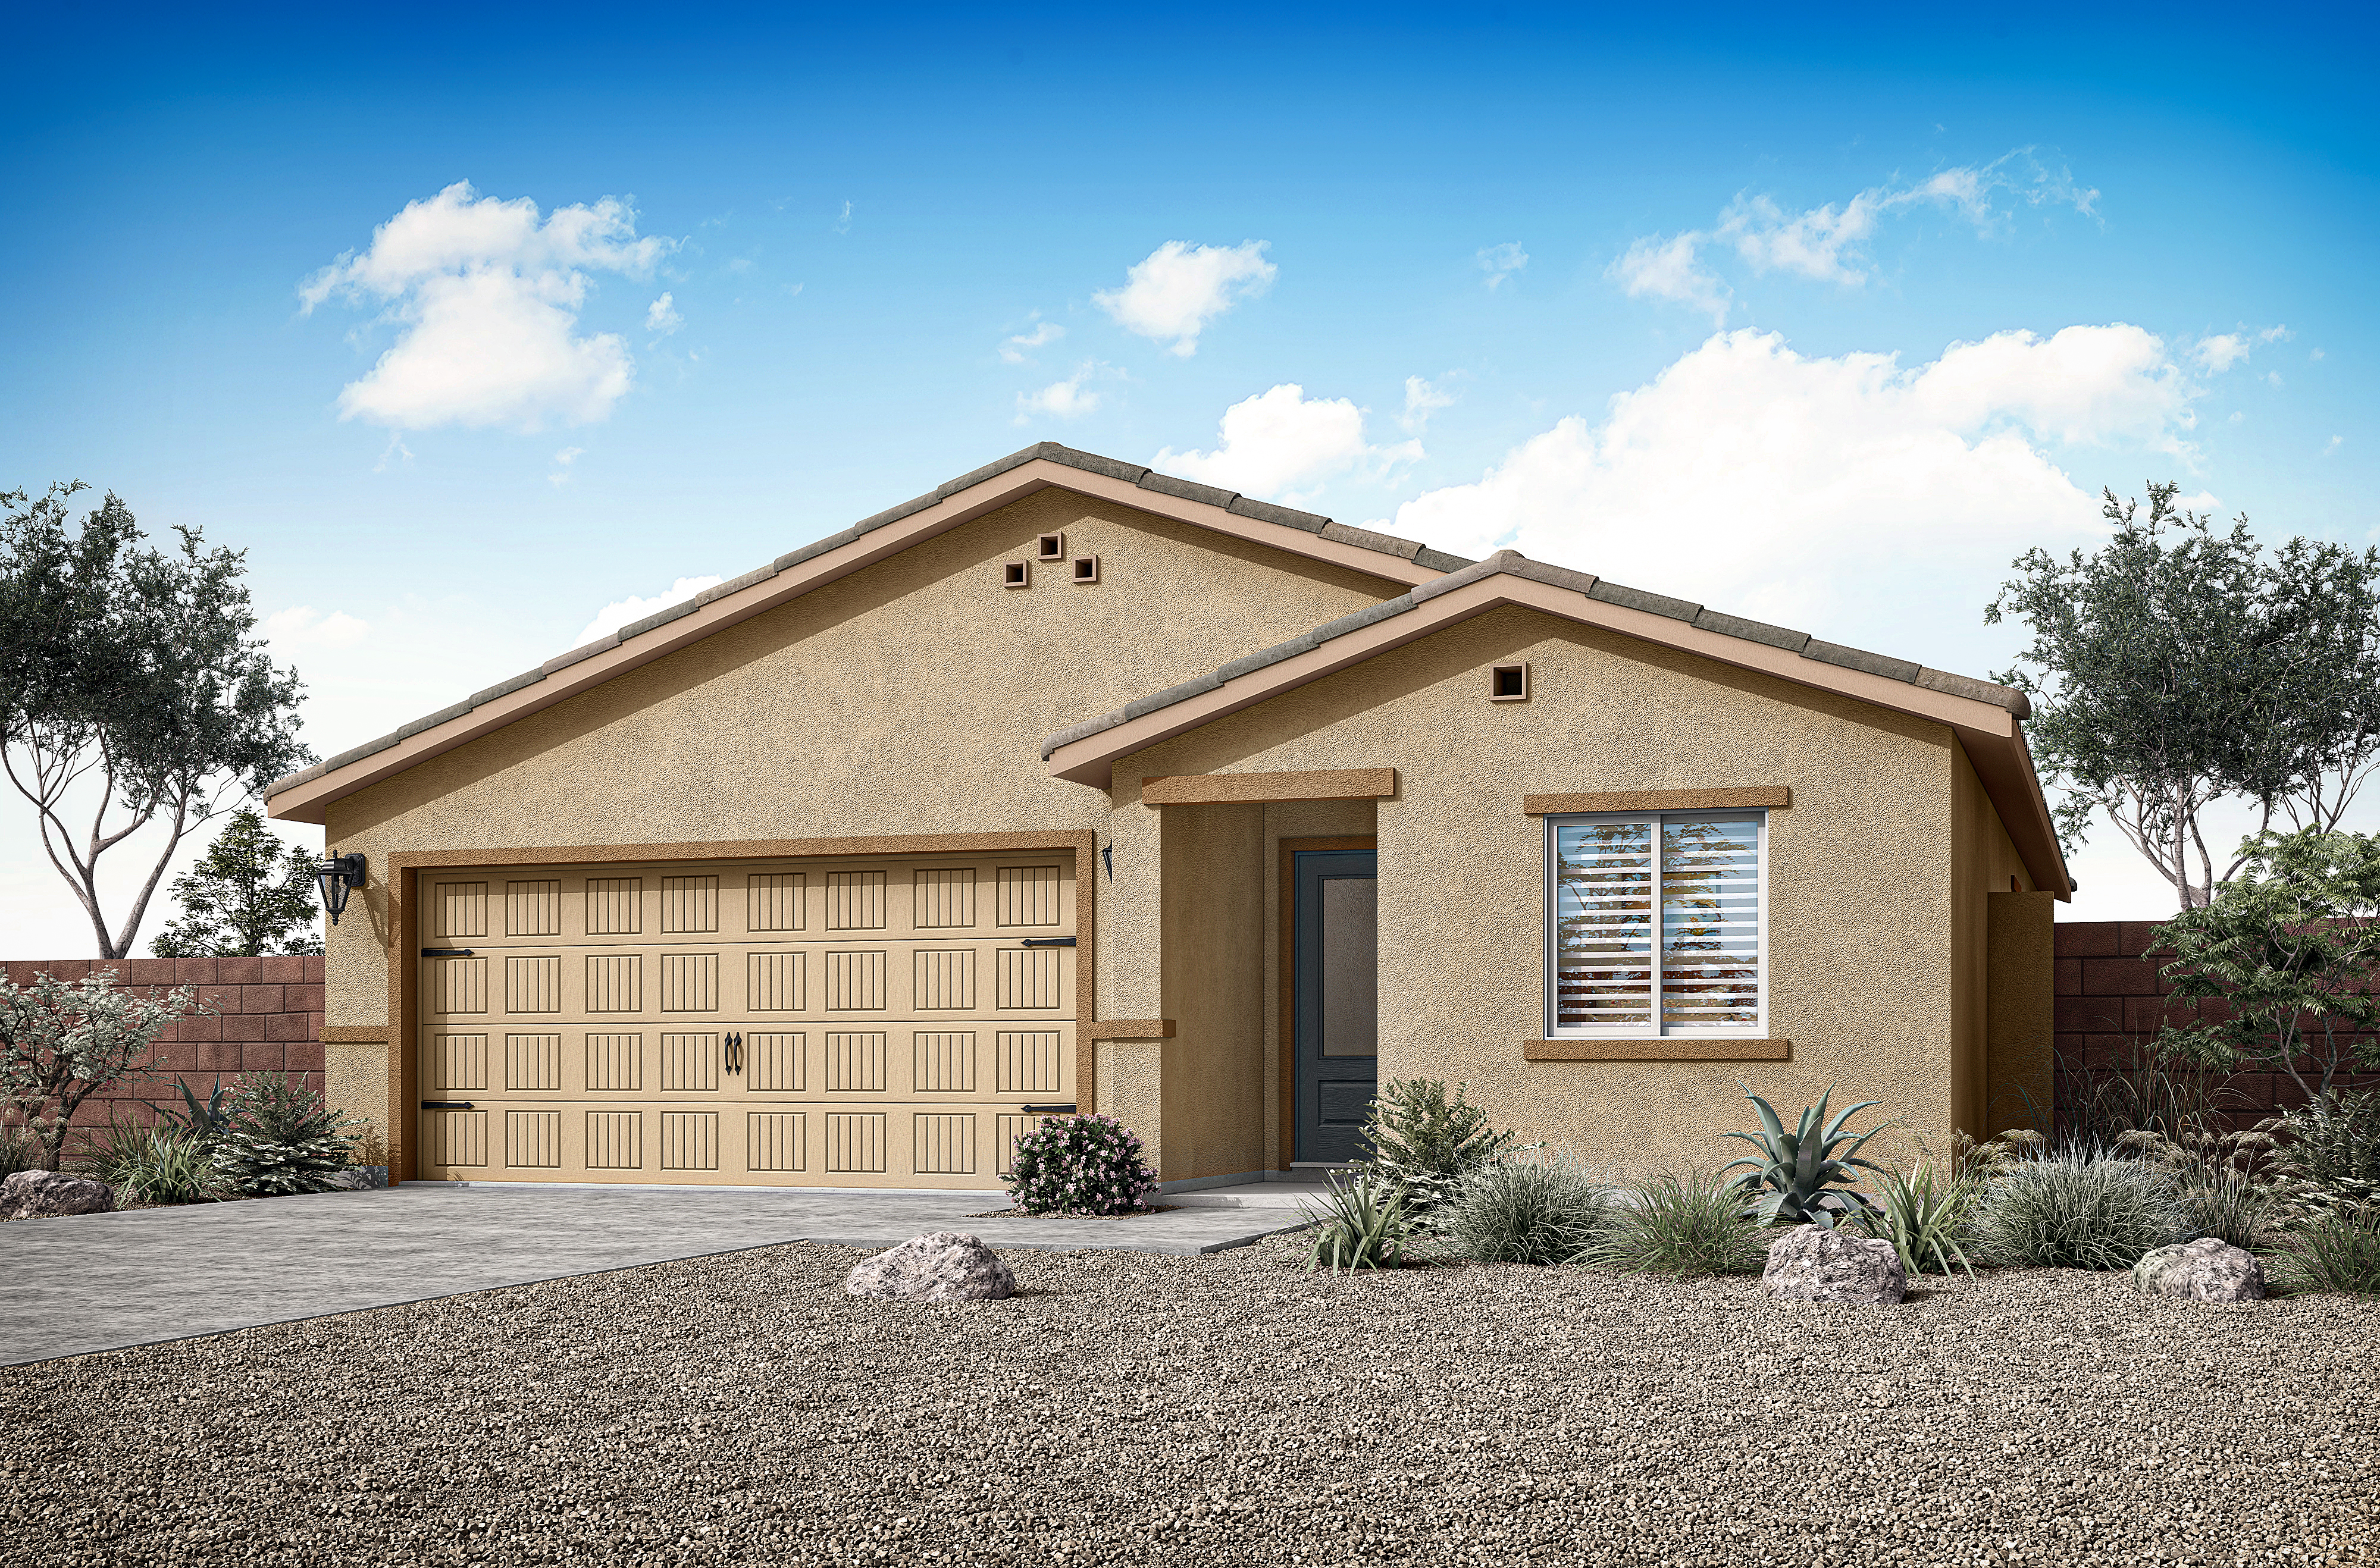 This spacious three-bedroom, two-bath Amado plan features a beautiful stucco exterior with a covered front porch and open entertainment space.